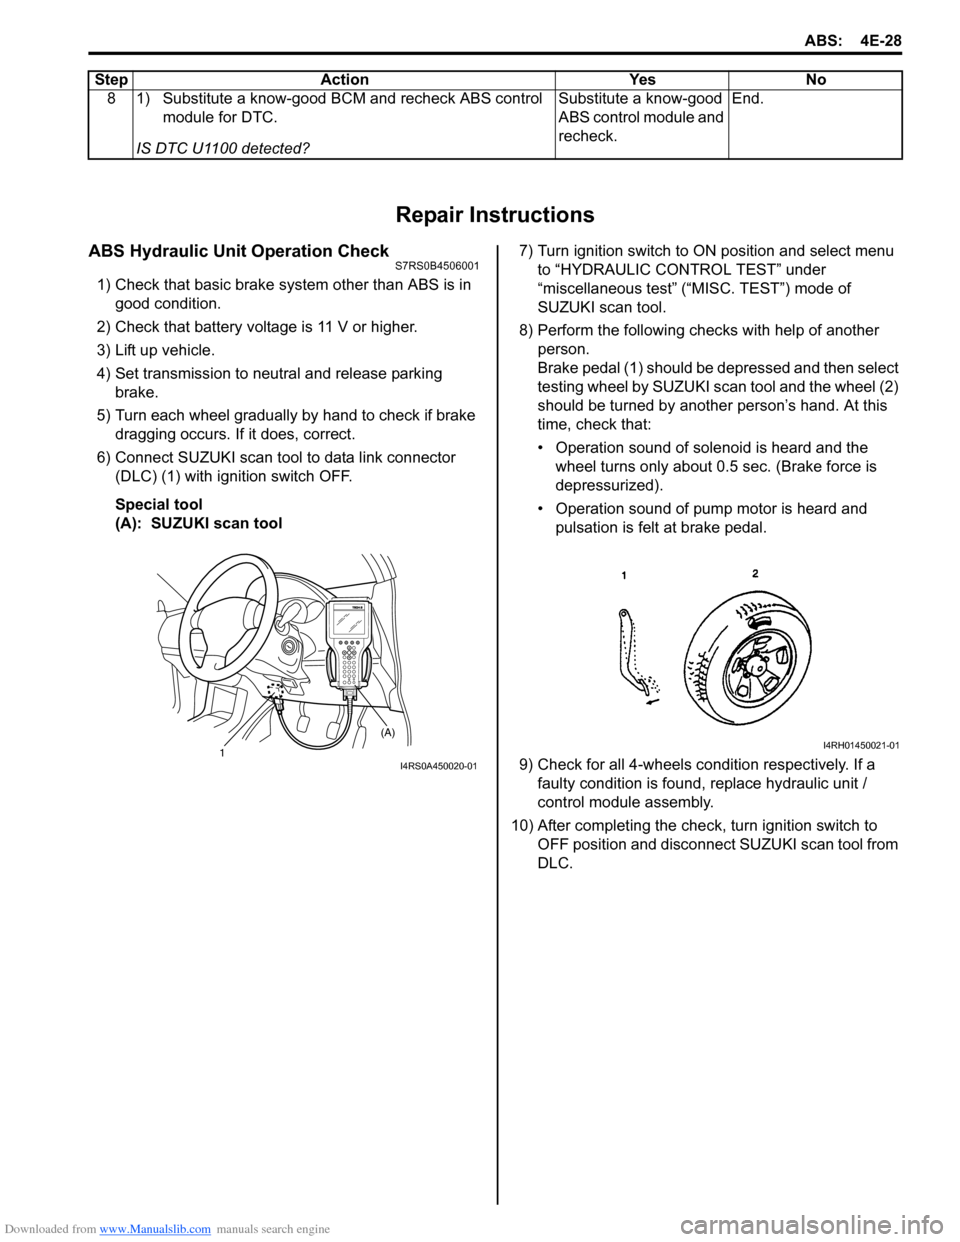 SUZUKI SWIFT 2006 2.G Service Workshop Manual Downloaded from www.Manualslib.com manuals search engine ABS: 4E-28
Repair Instructions
ABS Hydraulic Unit Operation CheckS7RS0B4506001
1) Check that basic brake system other than ABS is in good condi